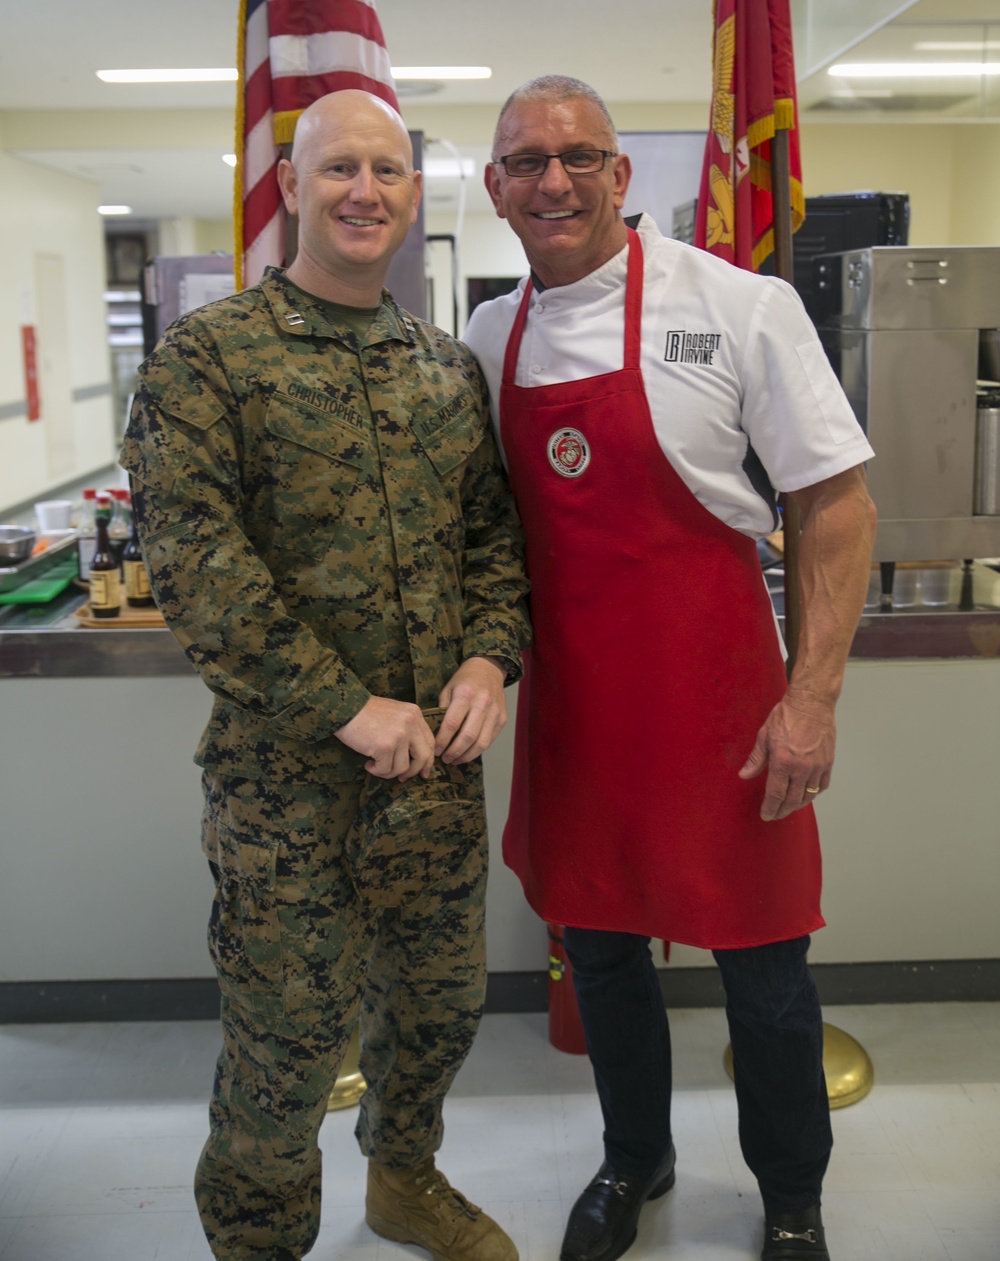 Chef Irvine works up an appetite with the Marines